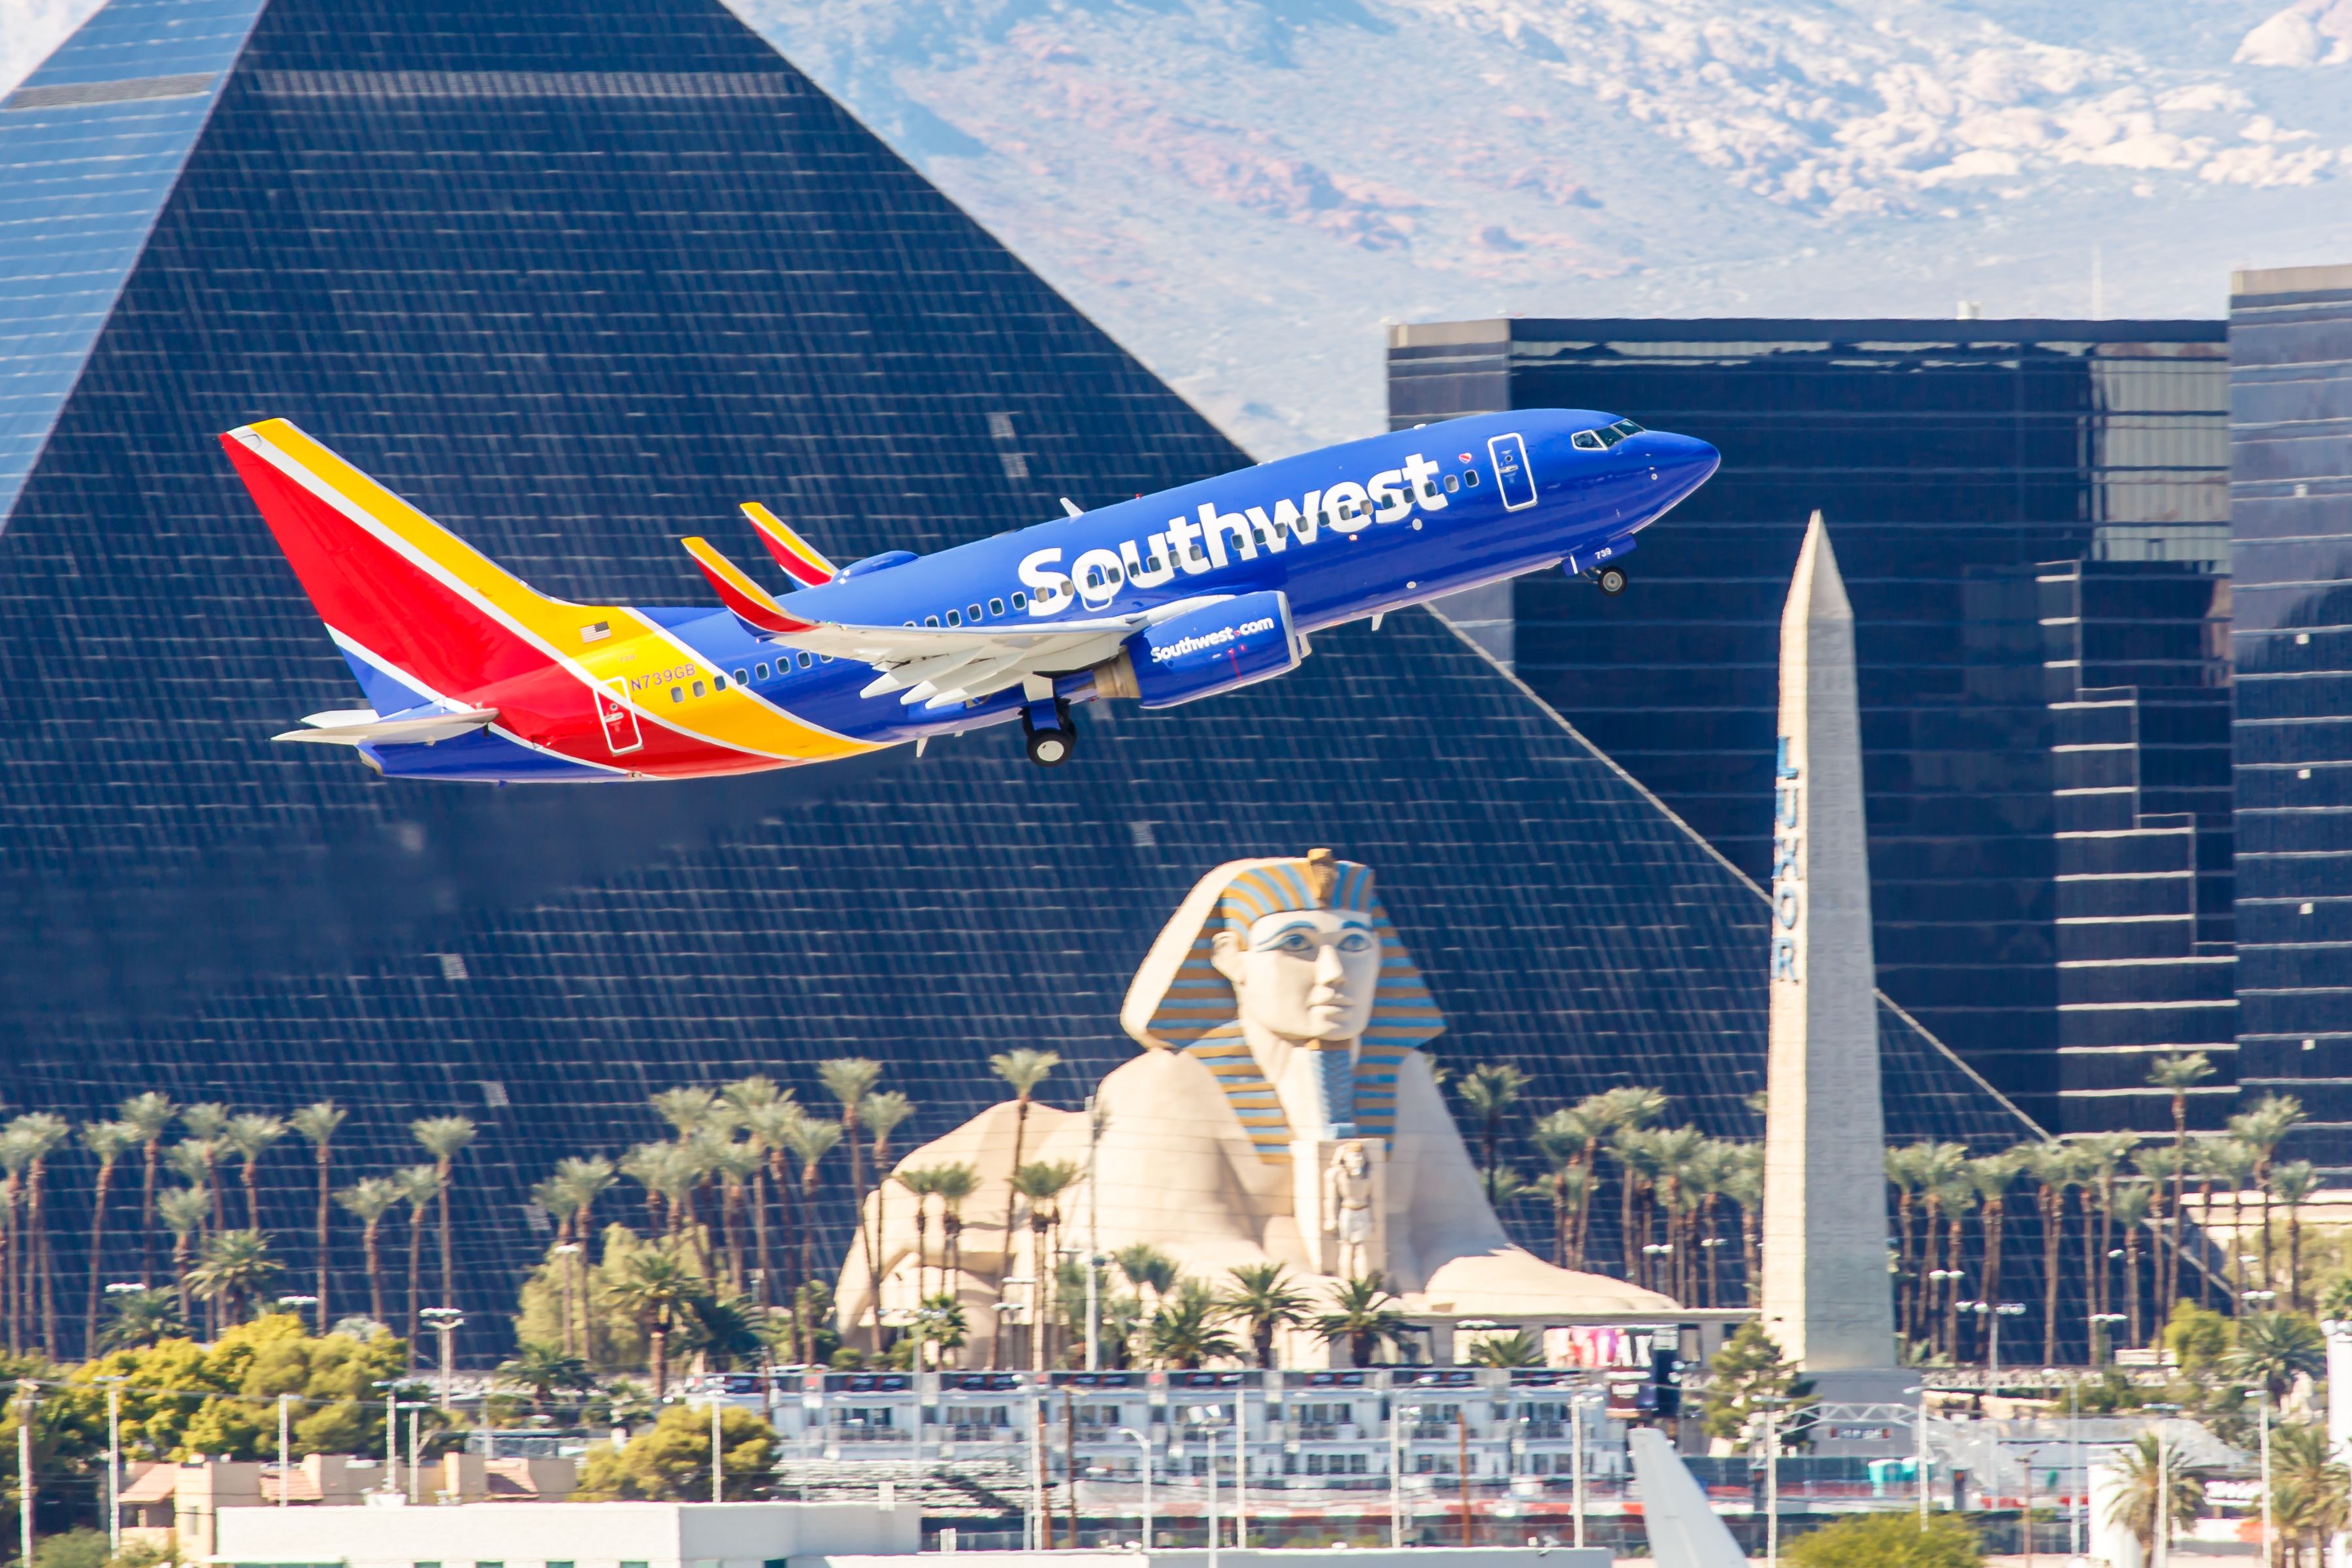 Boeing 737 Southwest Airlines takes off from McCarran in Las Vegas, NV 